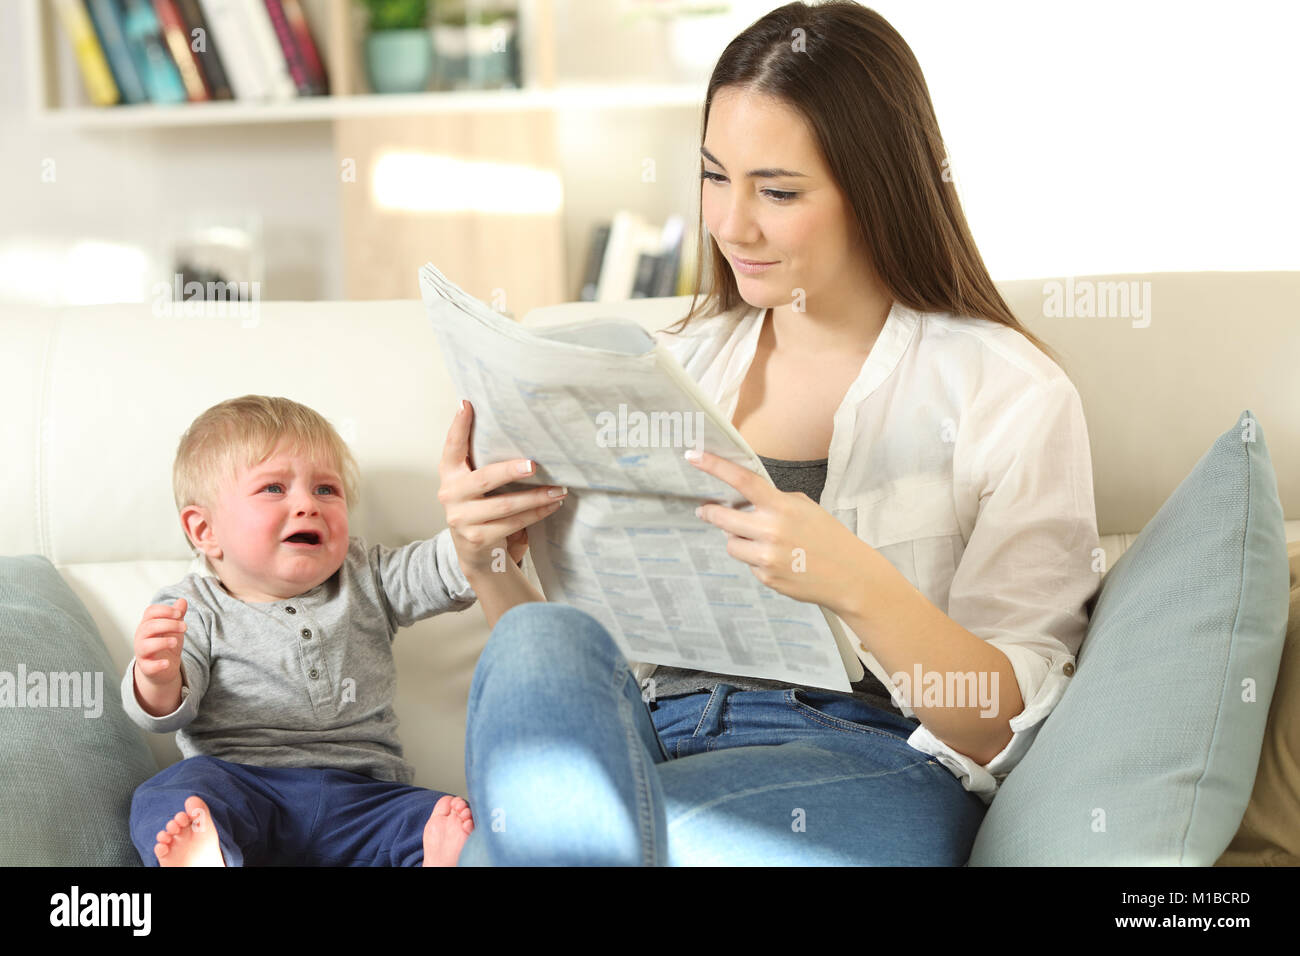 Baby crying demanding attention and his mother ignoring him sitting on a couch in the living room at home Stock Photo